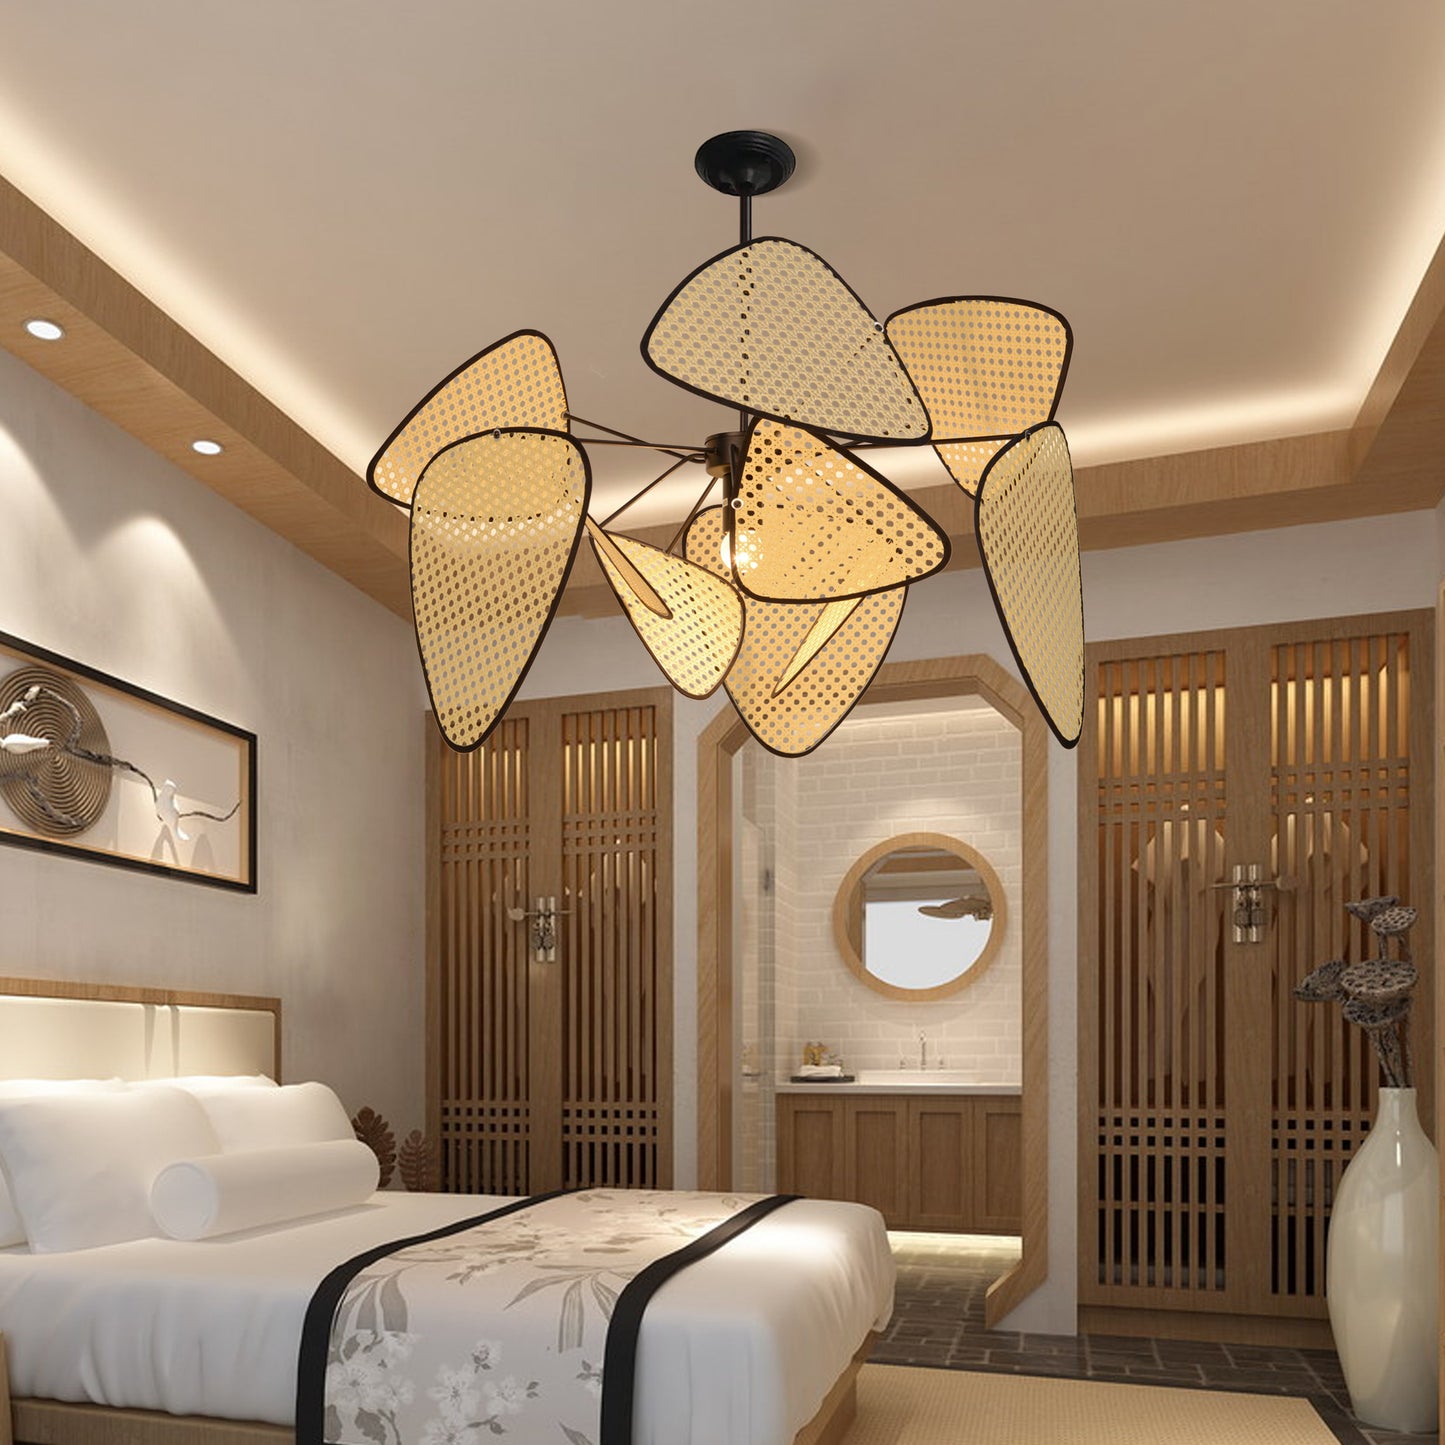 (M)Hollow Fan Blades Combination Rattan Pendant Light Shade For Bedroom Kitchen Island